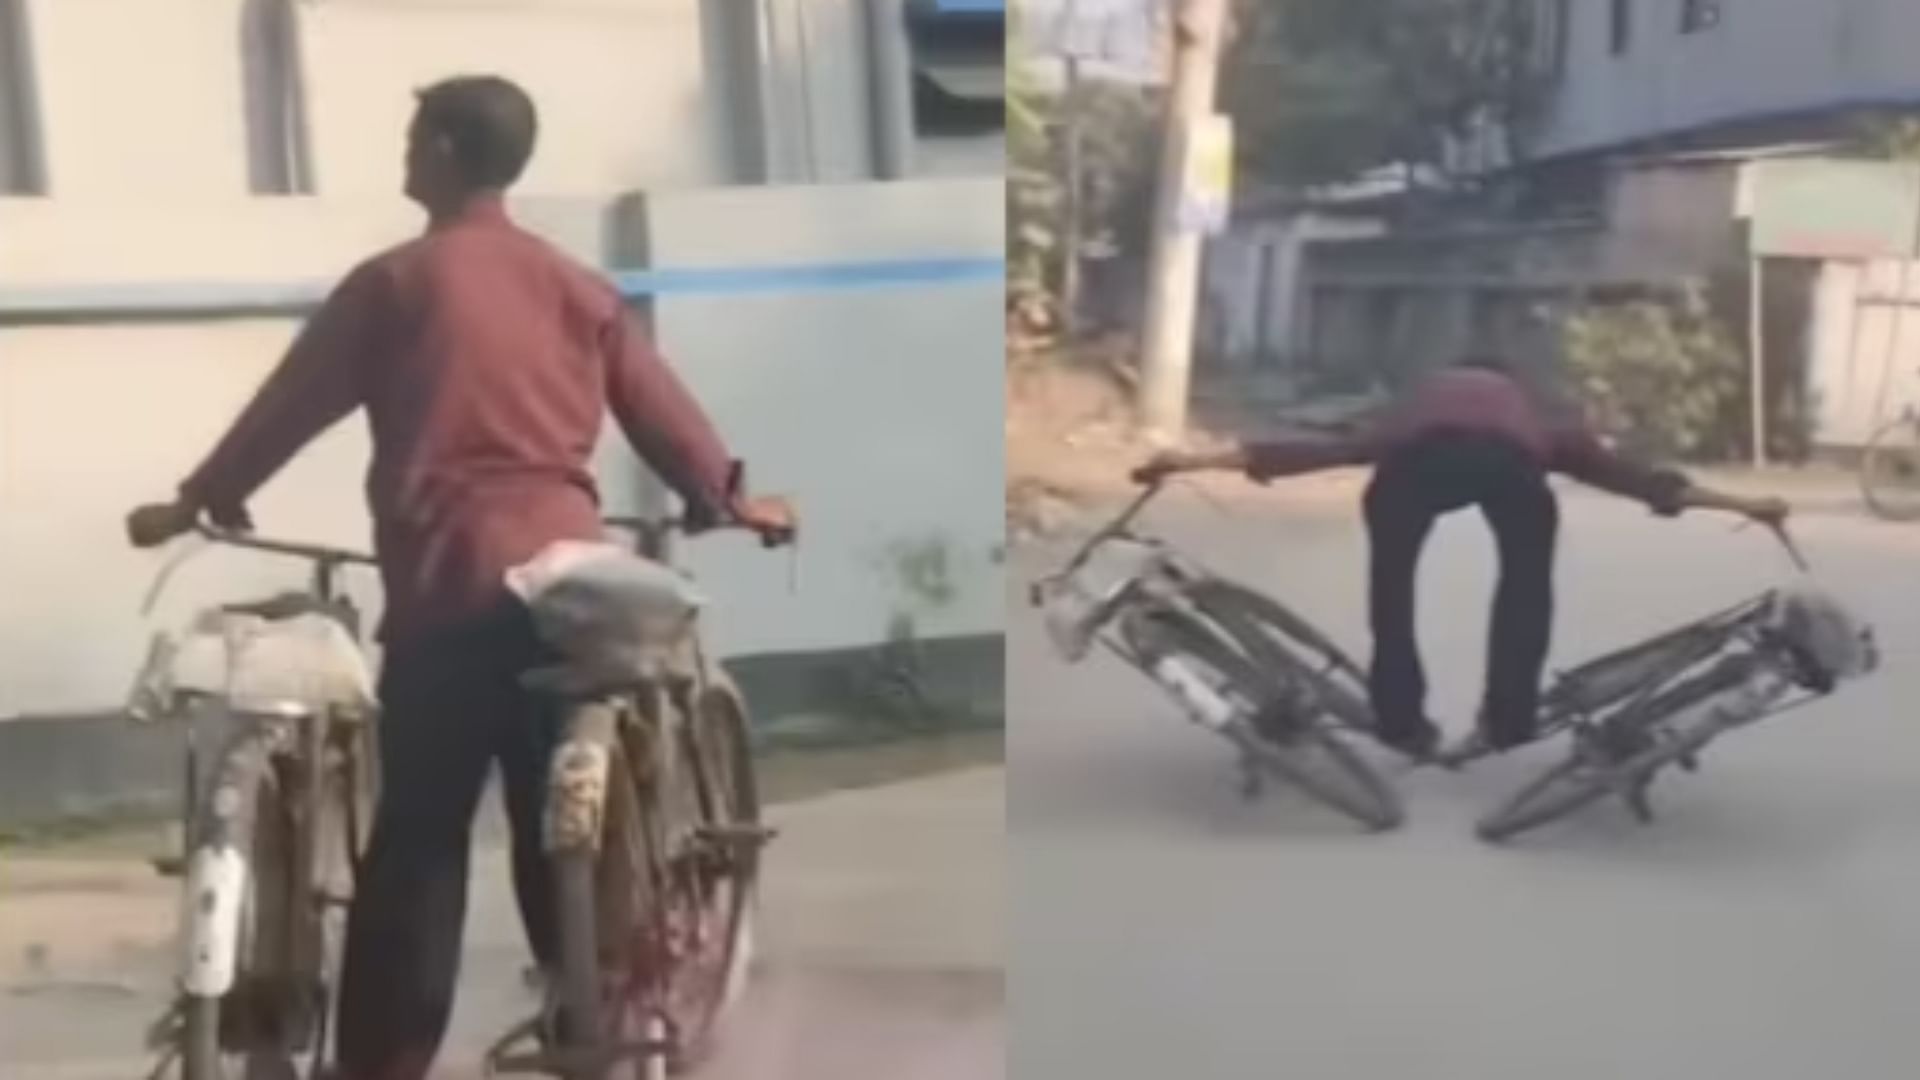 Man did an amazing stunt on two cycles video went viral on social media